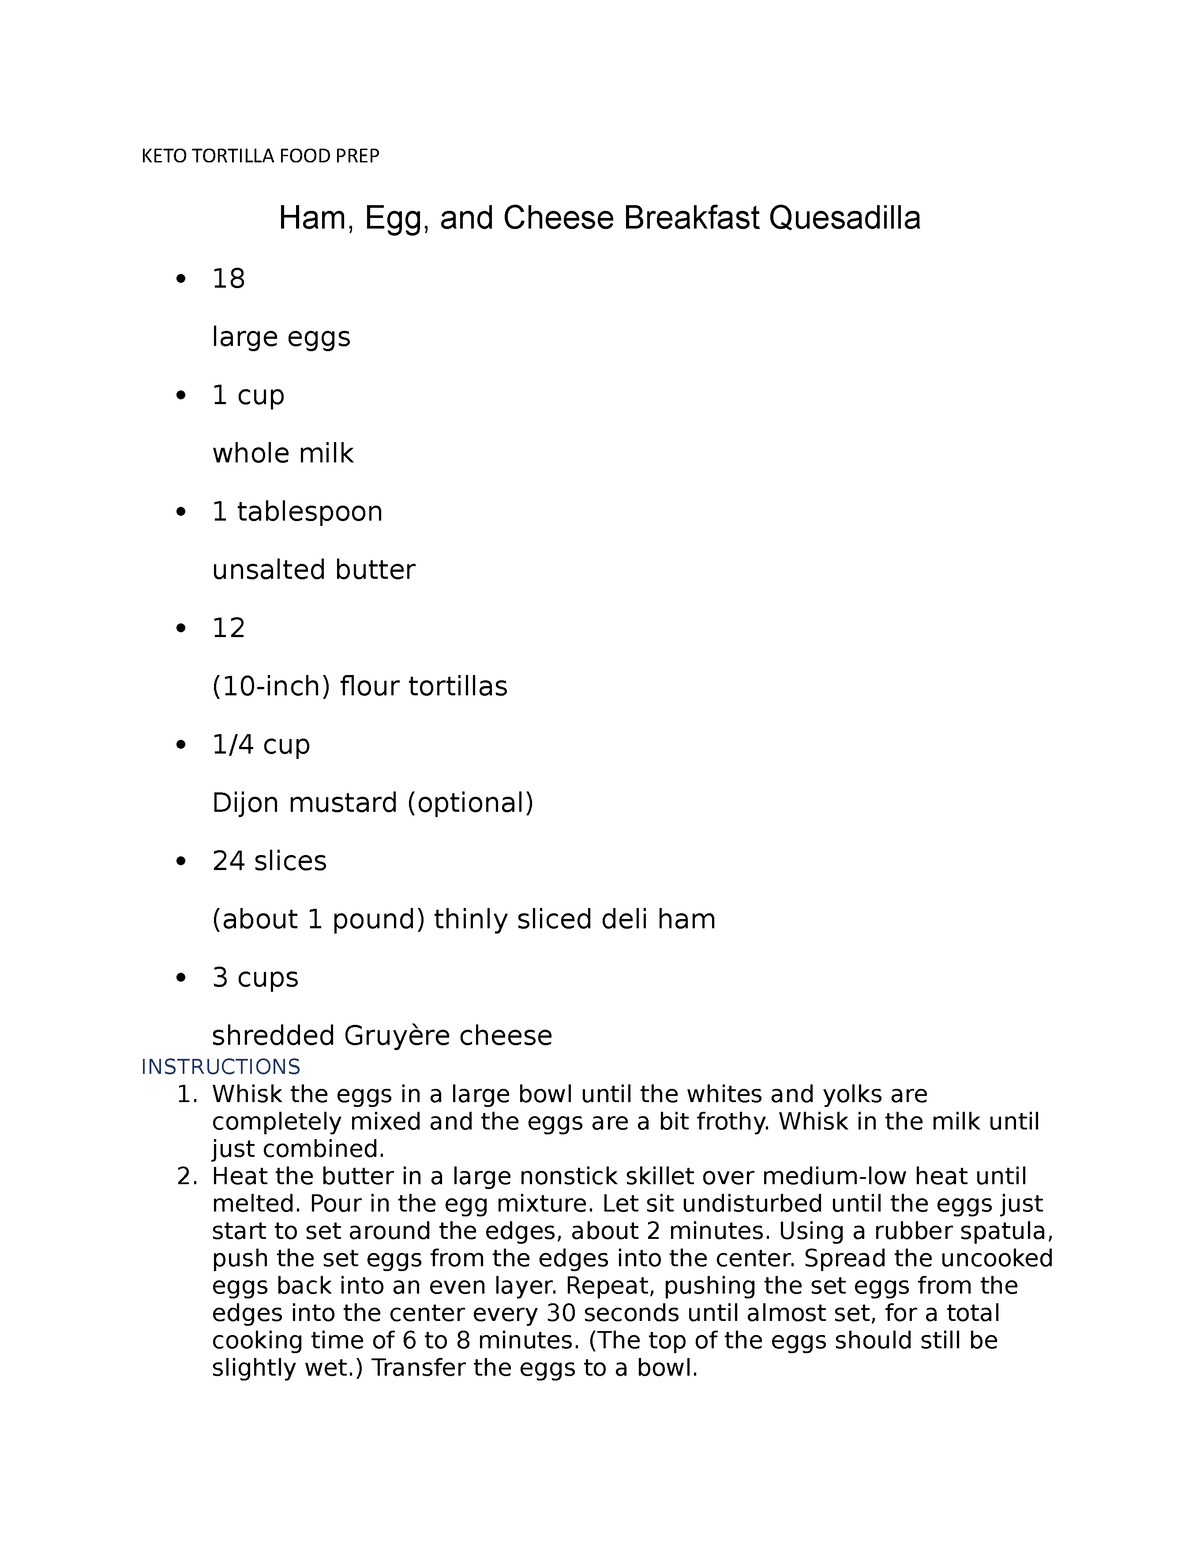 KETO Tortilla FOOD PREP - KETO TORTILLA FOOD PREP Ham, Egg, and Cheese ...